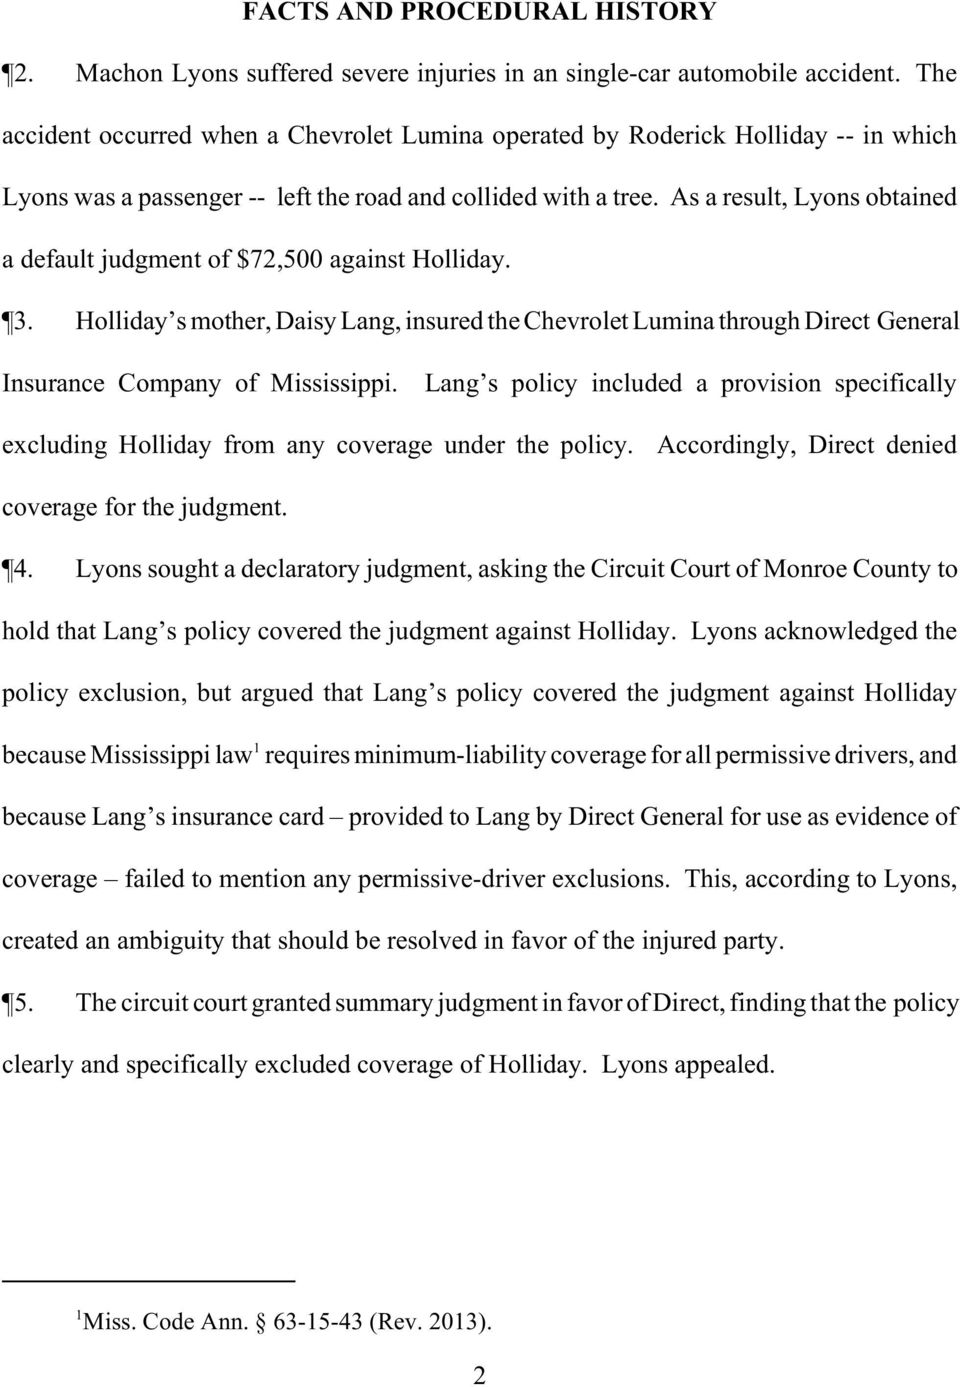 As a result, Lyons obtained a default judgment of $72,500 against Holliday. 3. Holliday s mother, Daisy Lang, insured the Chevrolet Lumina through Direct General Insurance Company of Mississippi.